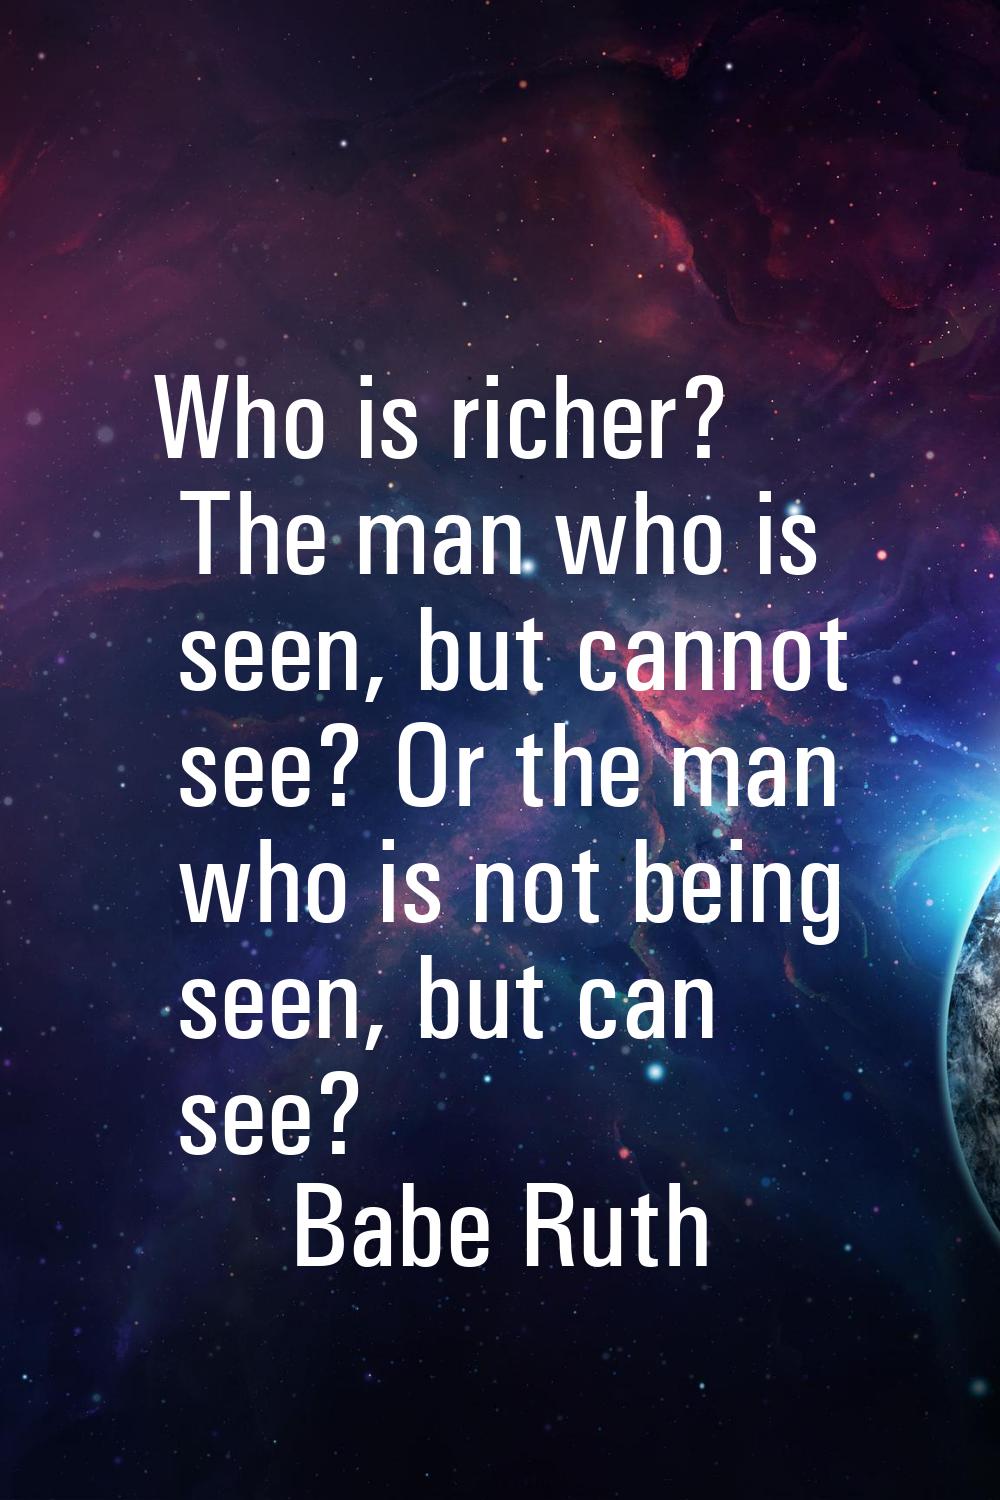 Who is richer? The man who is seen, but cannot see? Or the man who is not being seen, but can see?